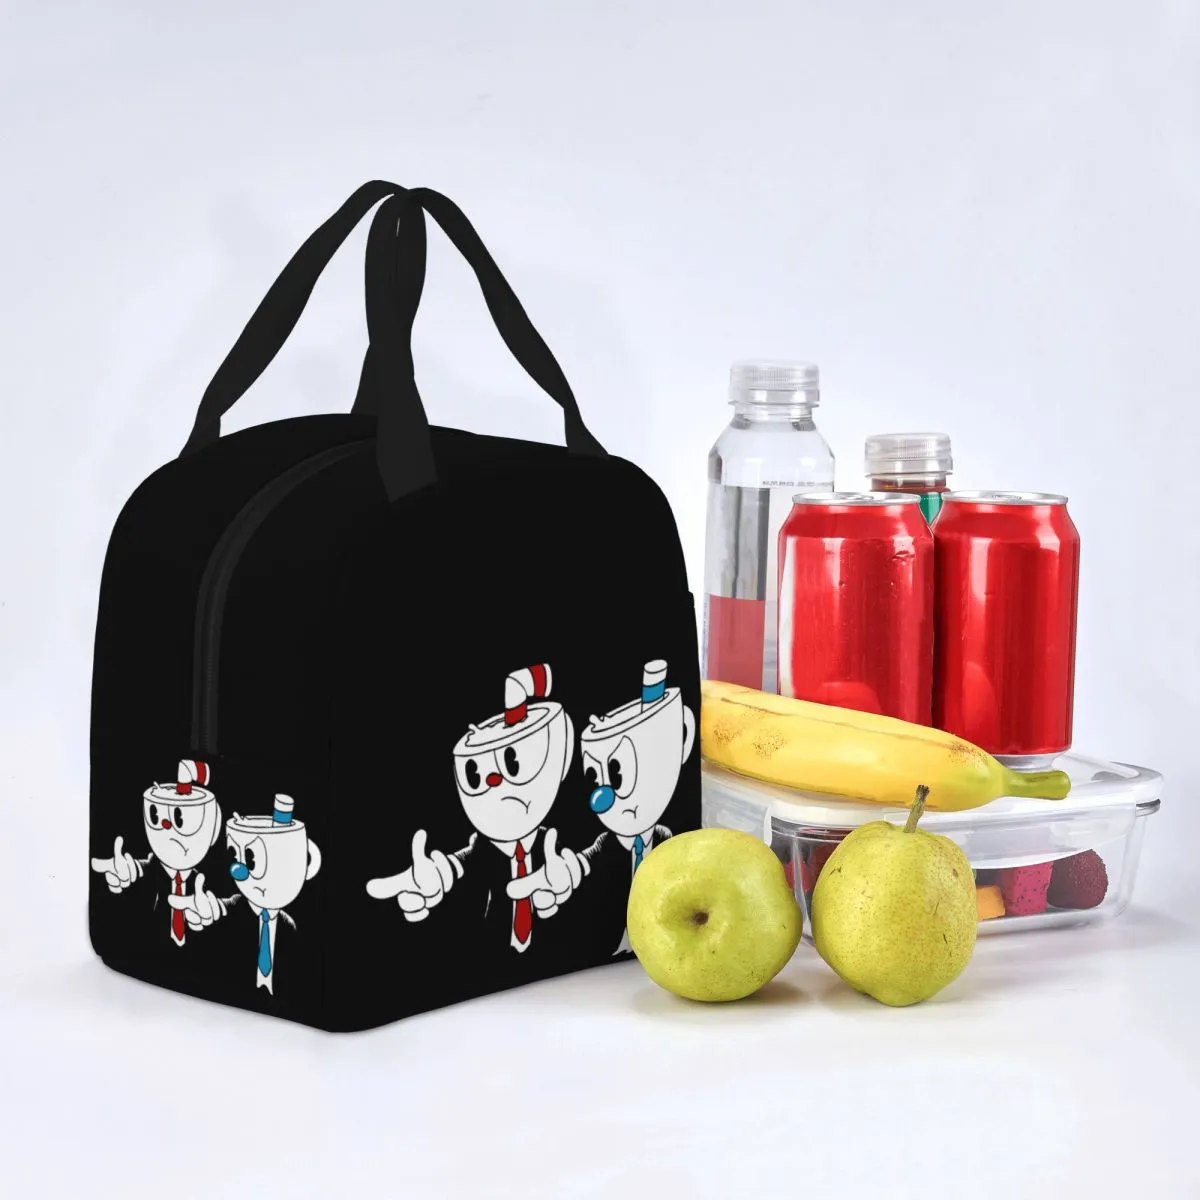 The Cuphead Cup Insulated Lunch Bag Cooler Bag Reusable Game Anime Large Tote Lunch Box for Men Women Office Picnic